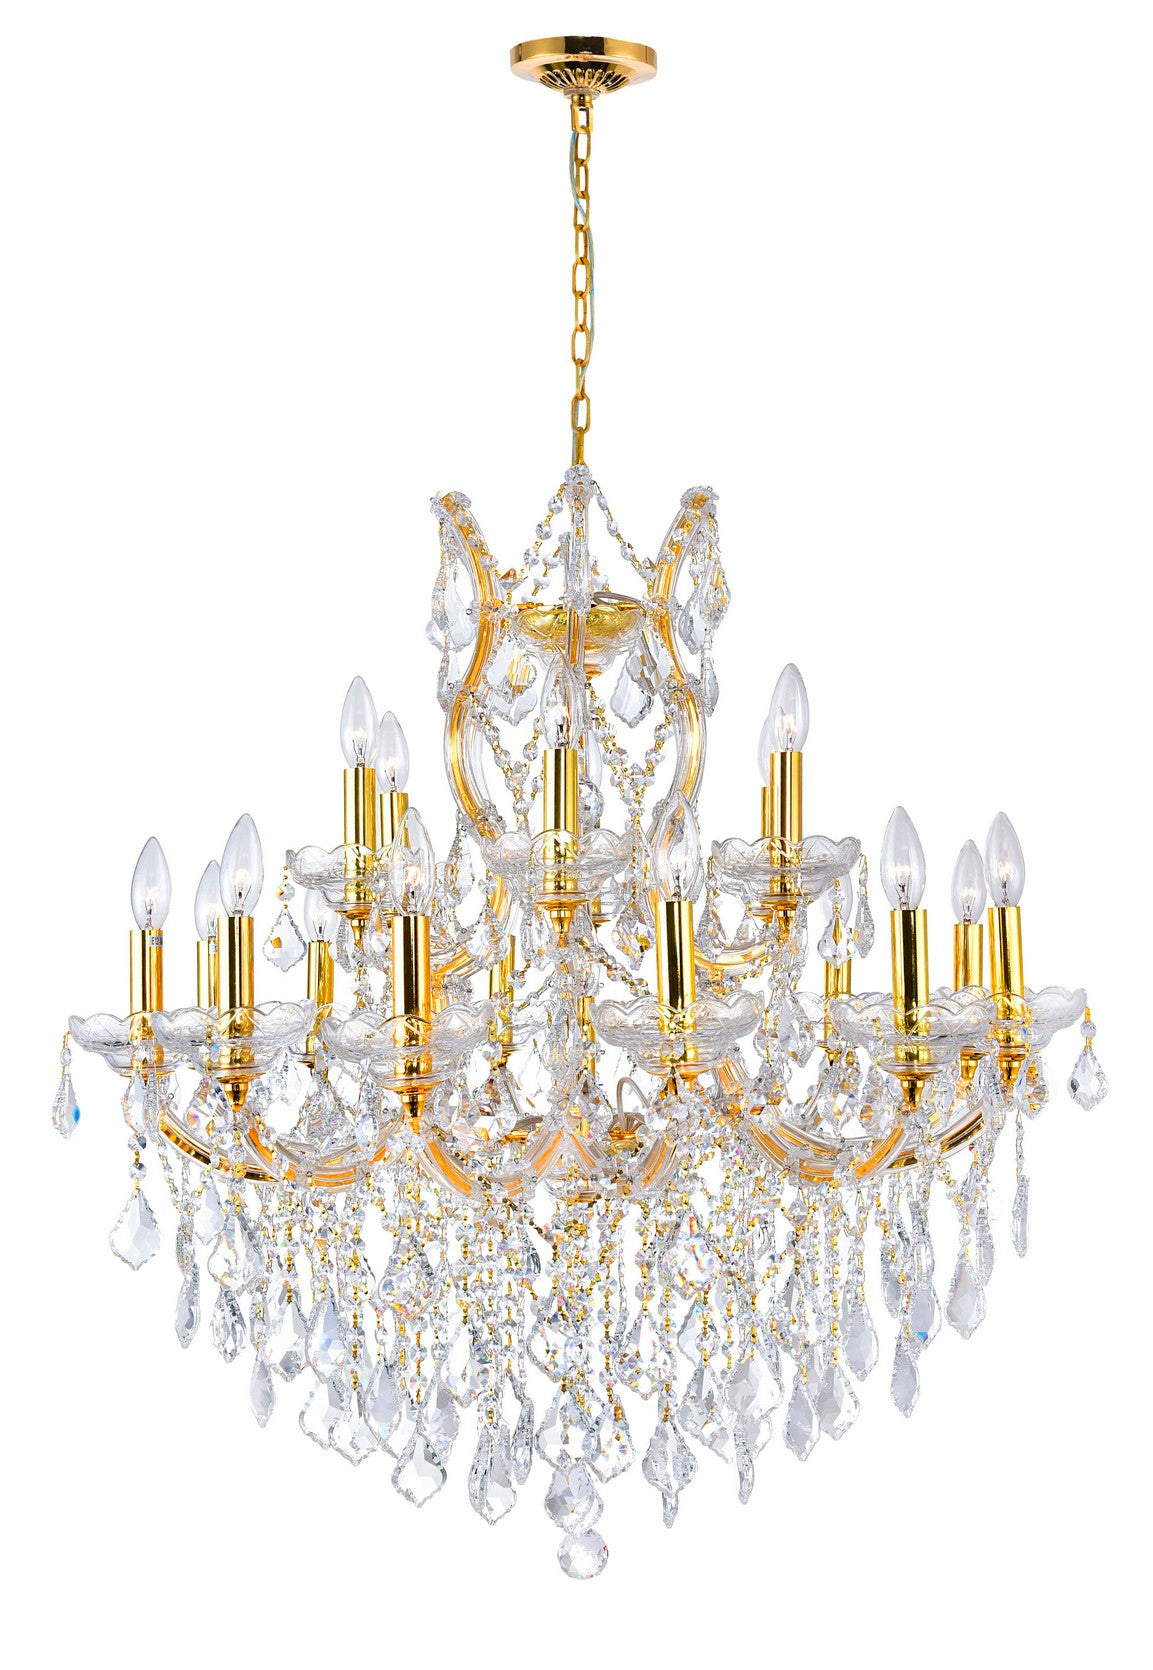 19 LIGHT UP CHANDELIER WITH GOLD FINISH - Dreamart Gallery